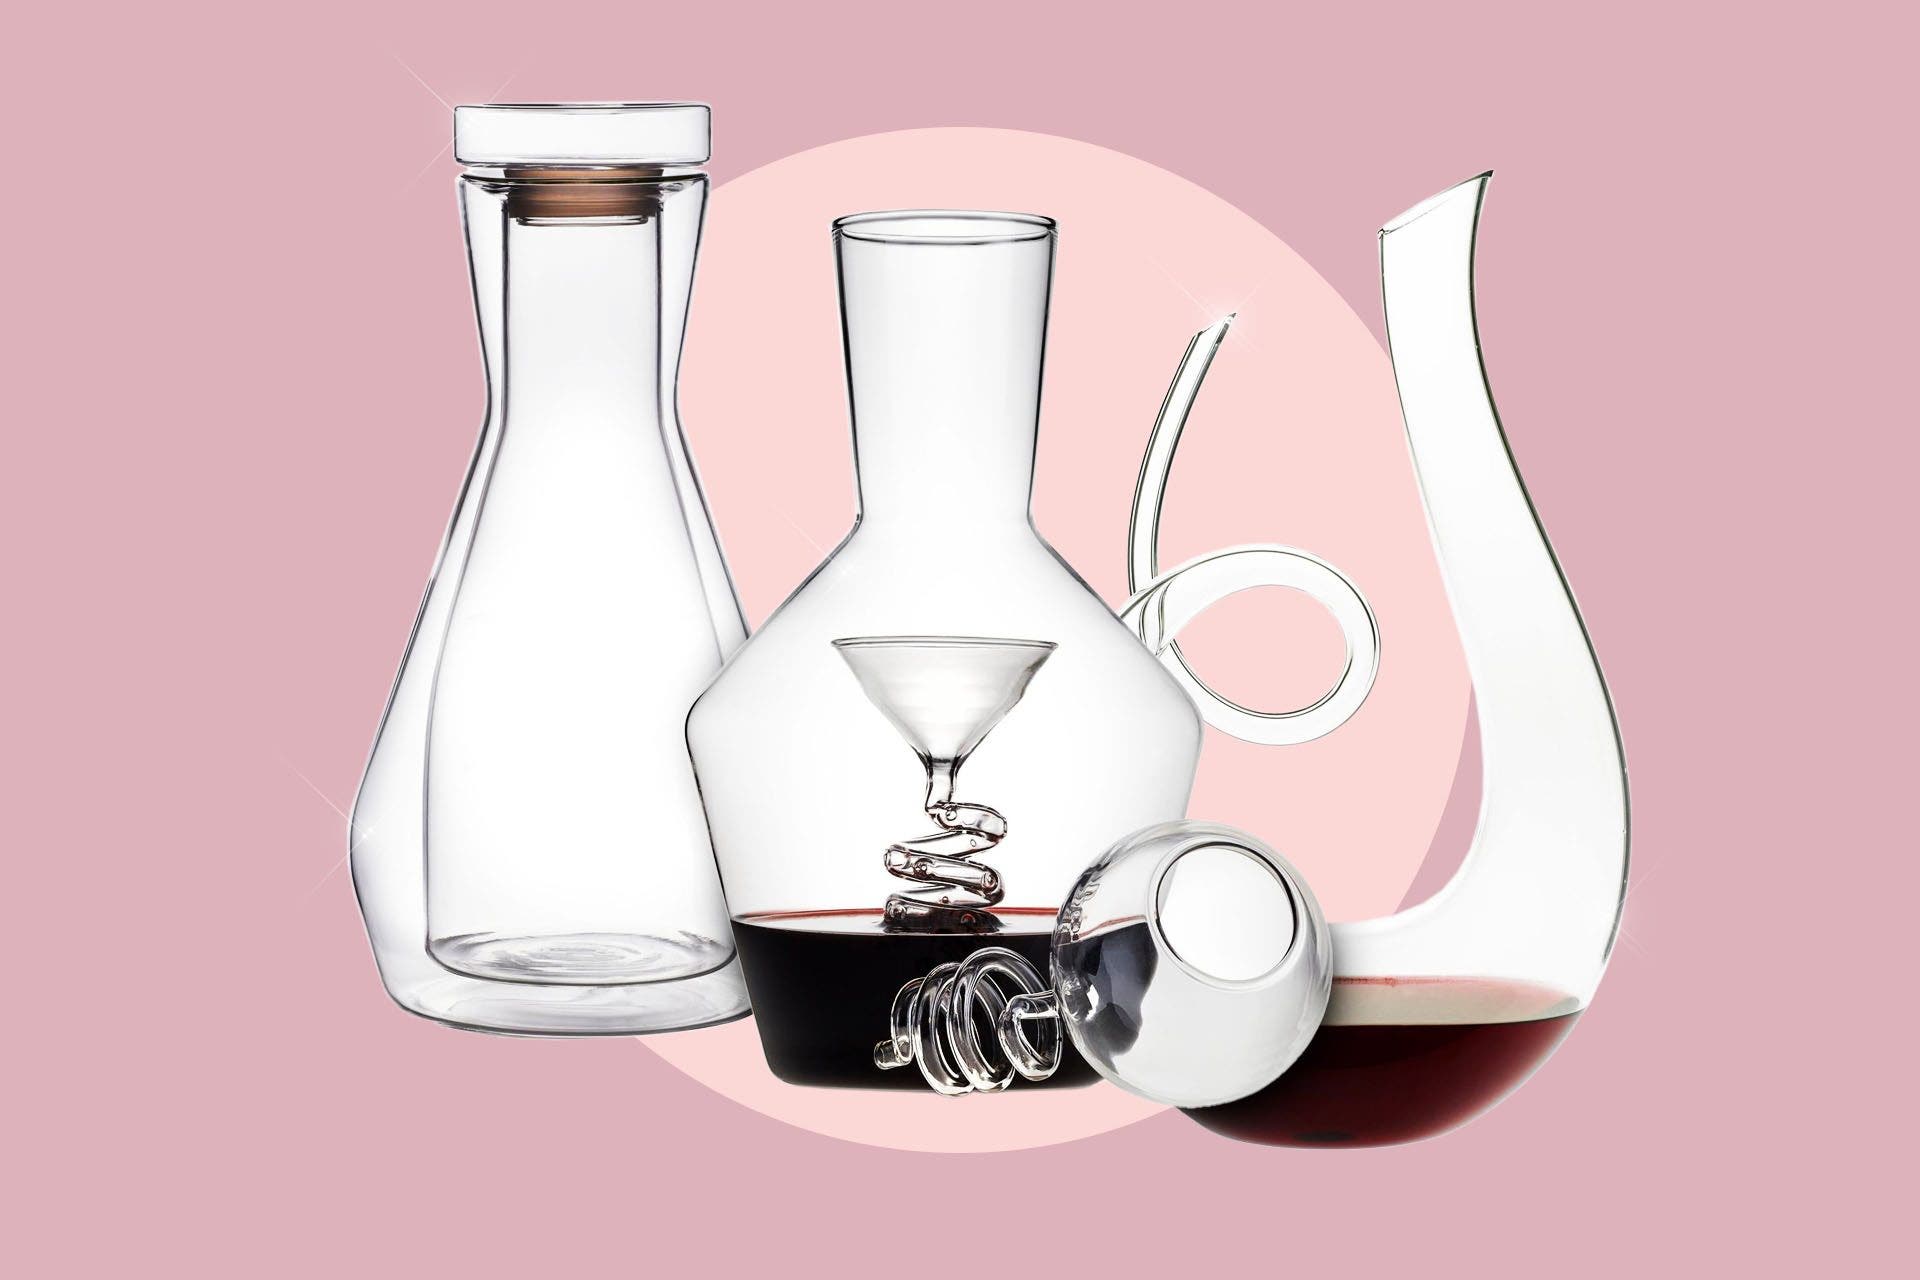 3 Wine Enthusiast decanters on a designed background